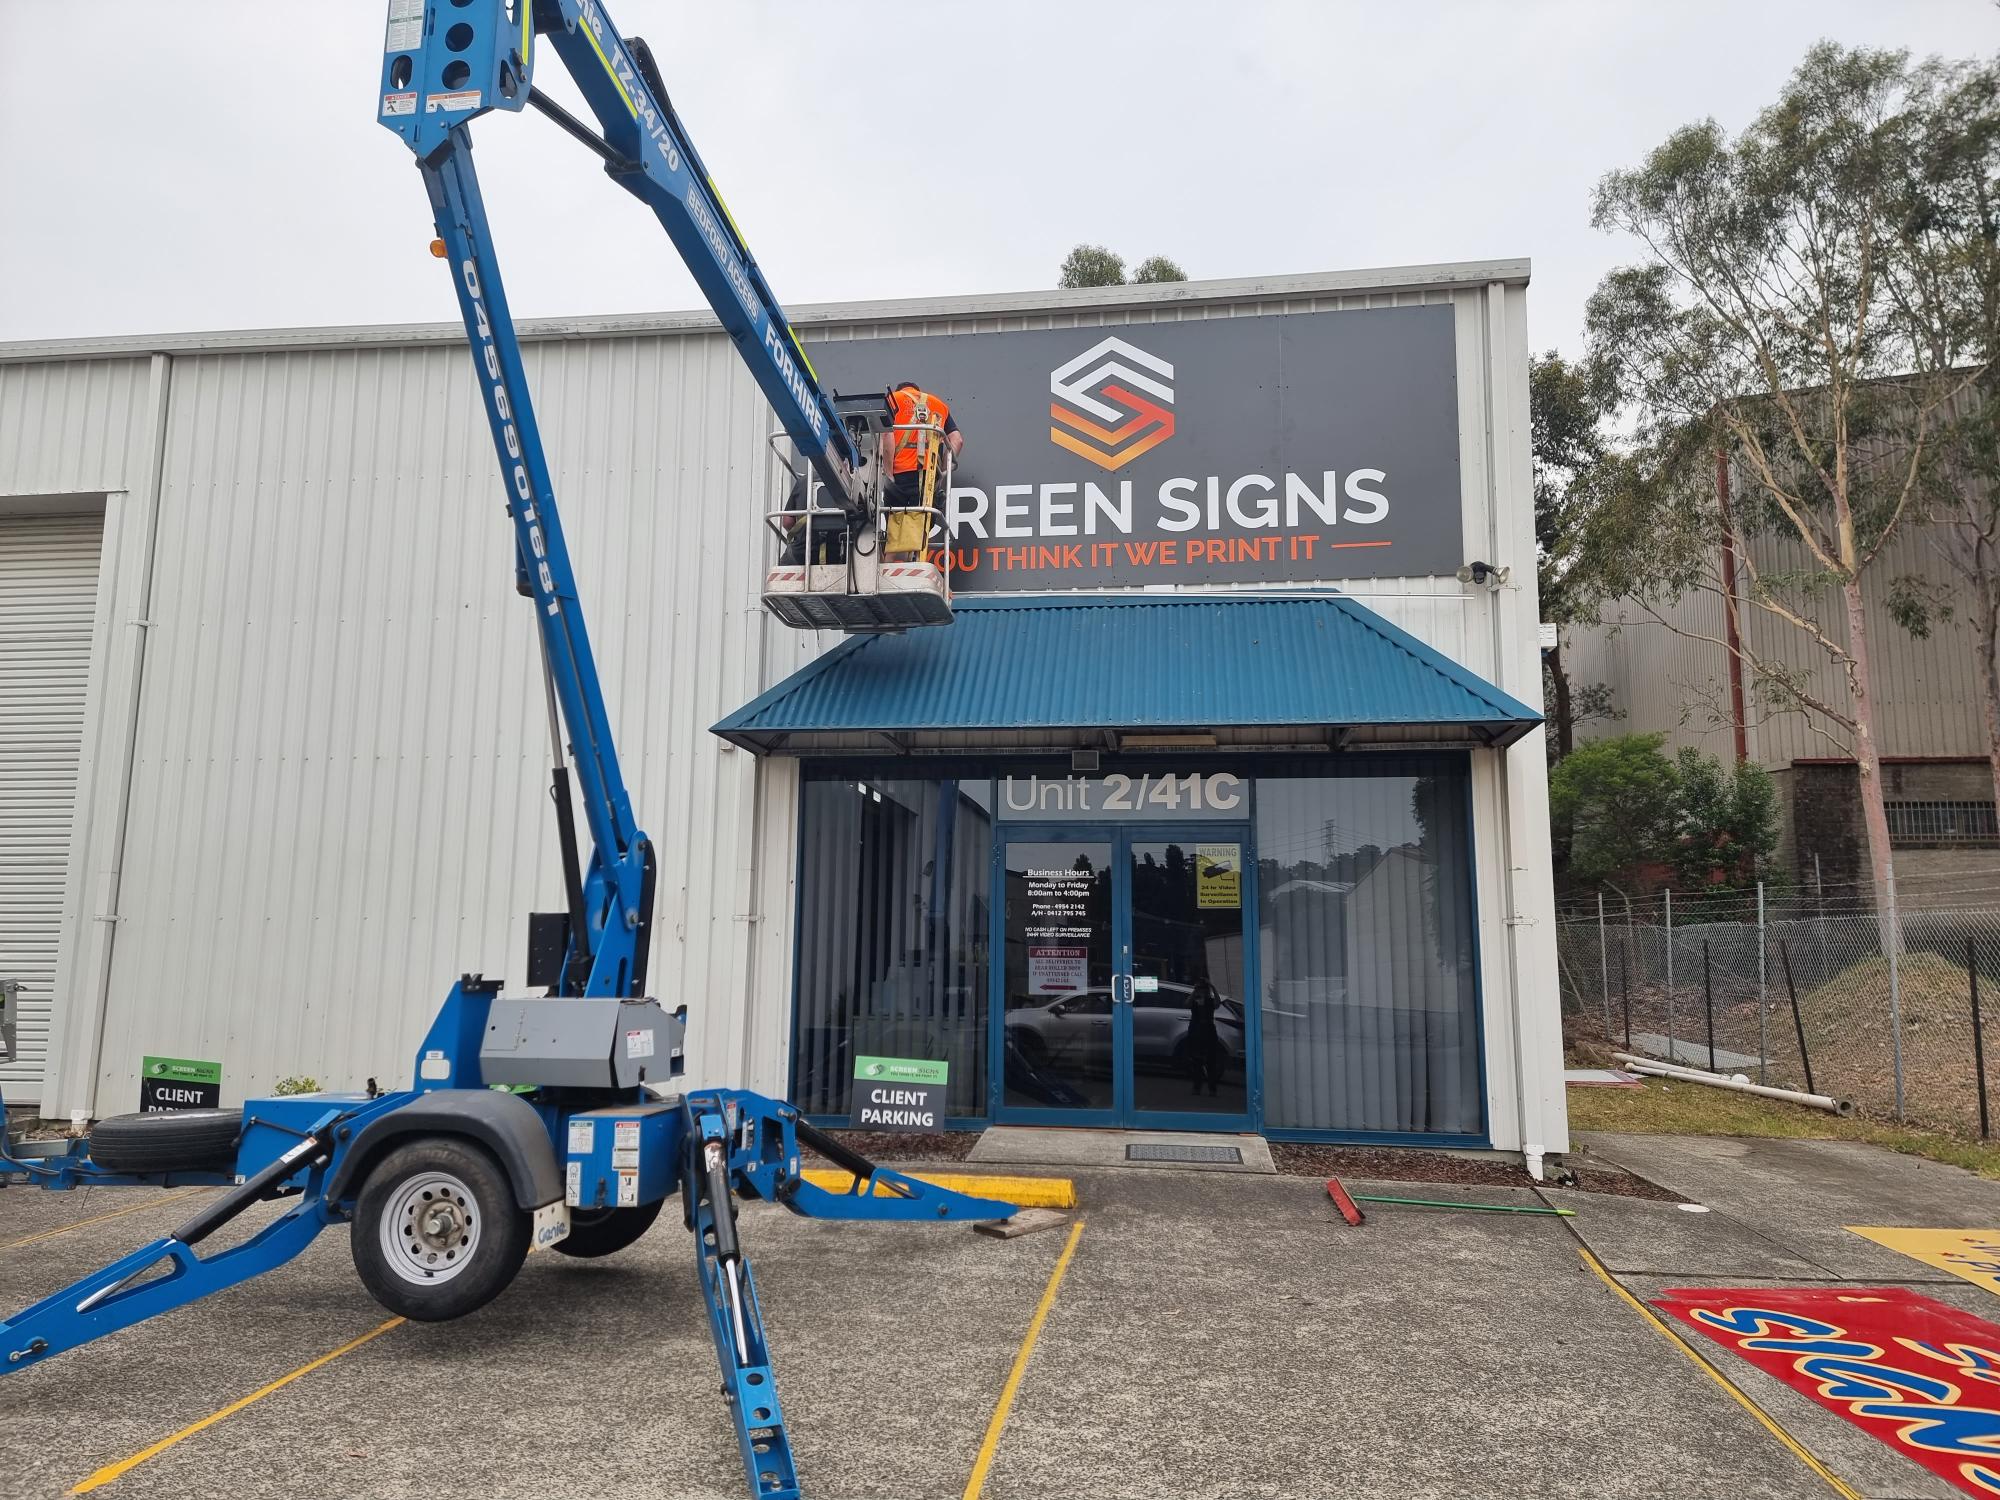 Screen Signs sign writer sign shop in Cardiff near Newcastle in NSW Australia